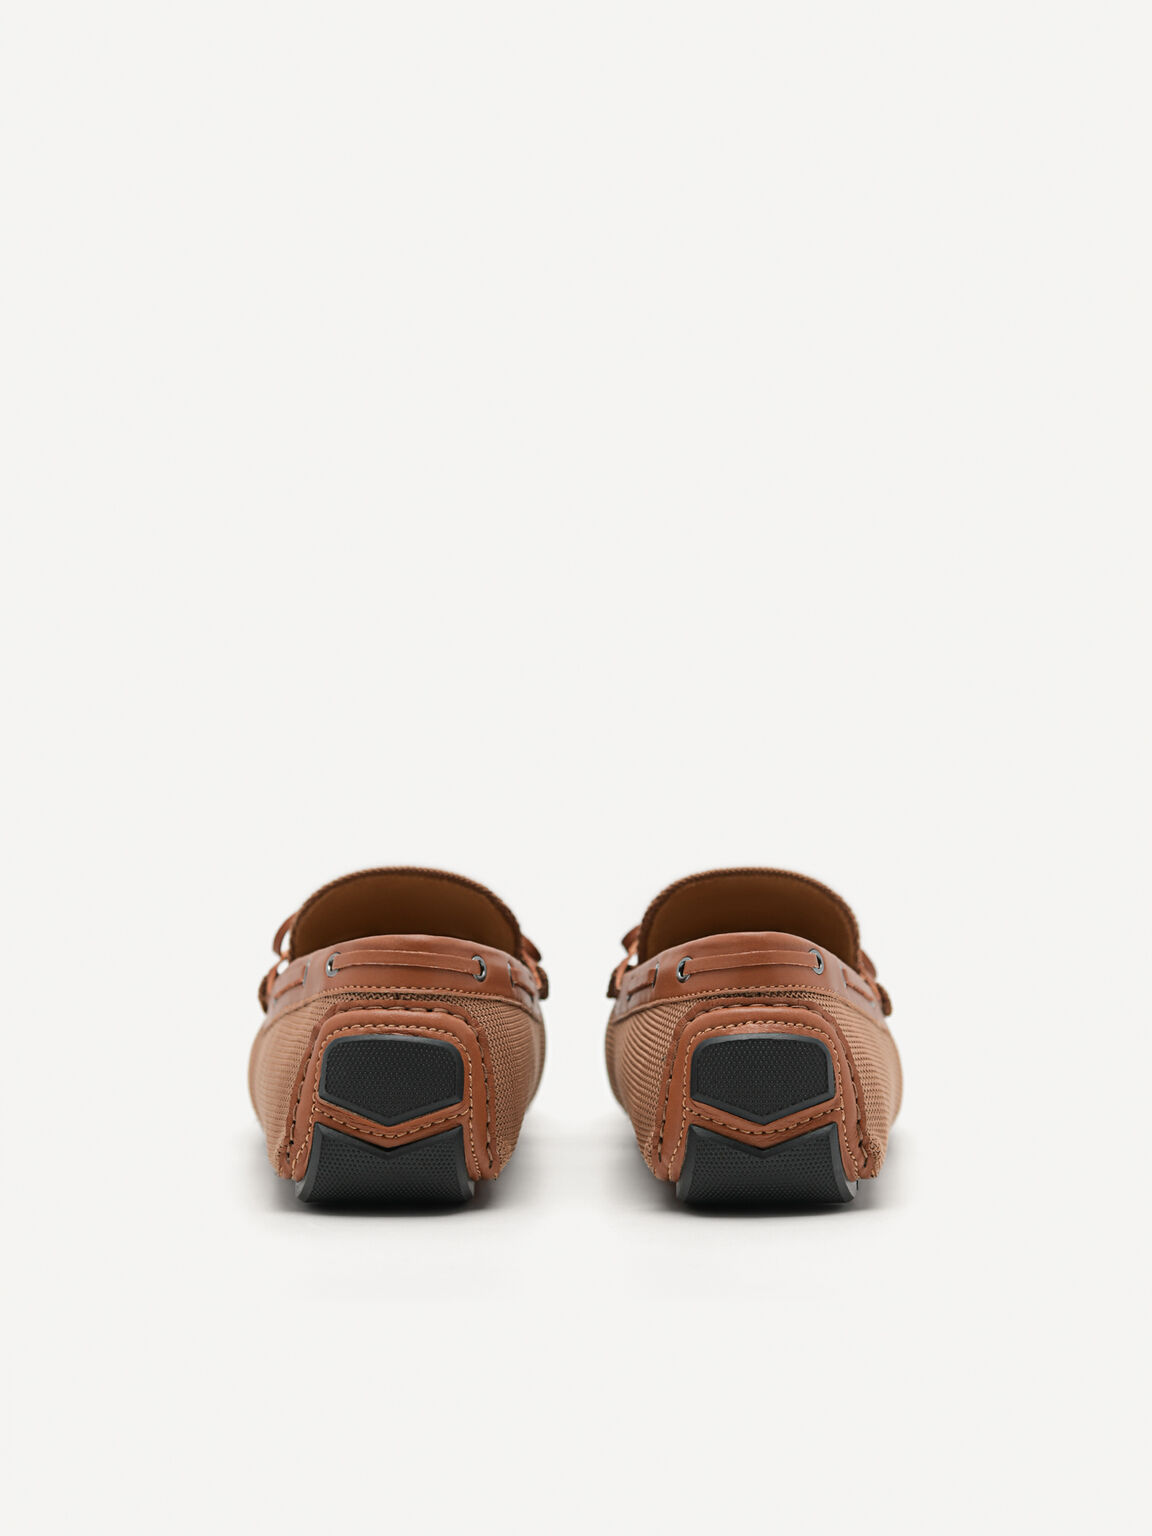 Michael Bow Moccasins, Camel